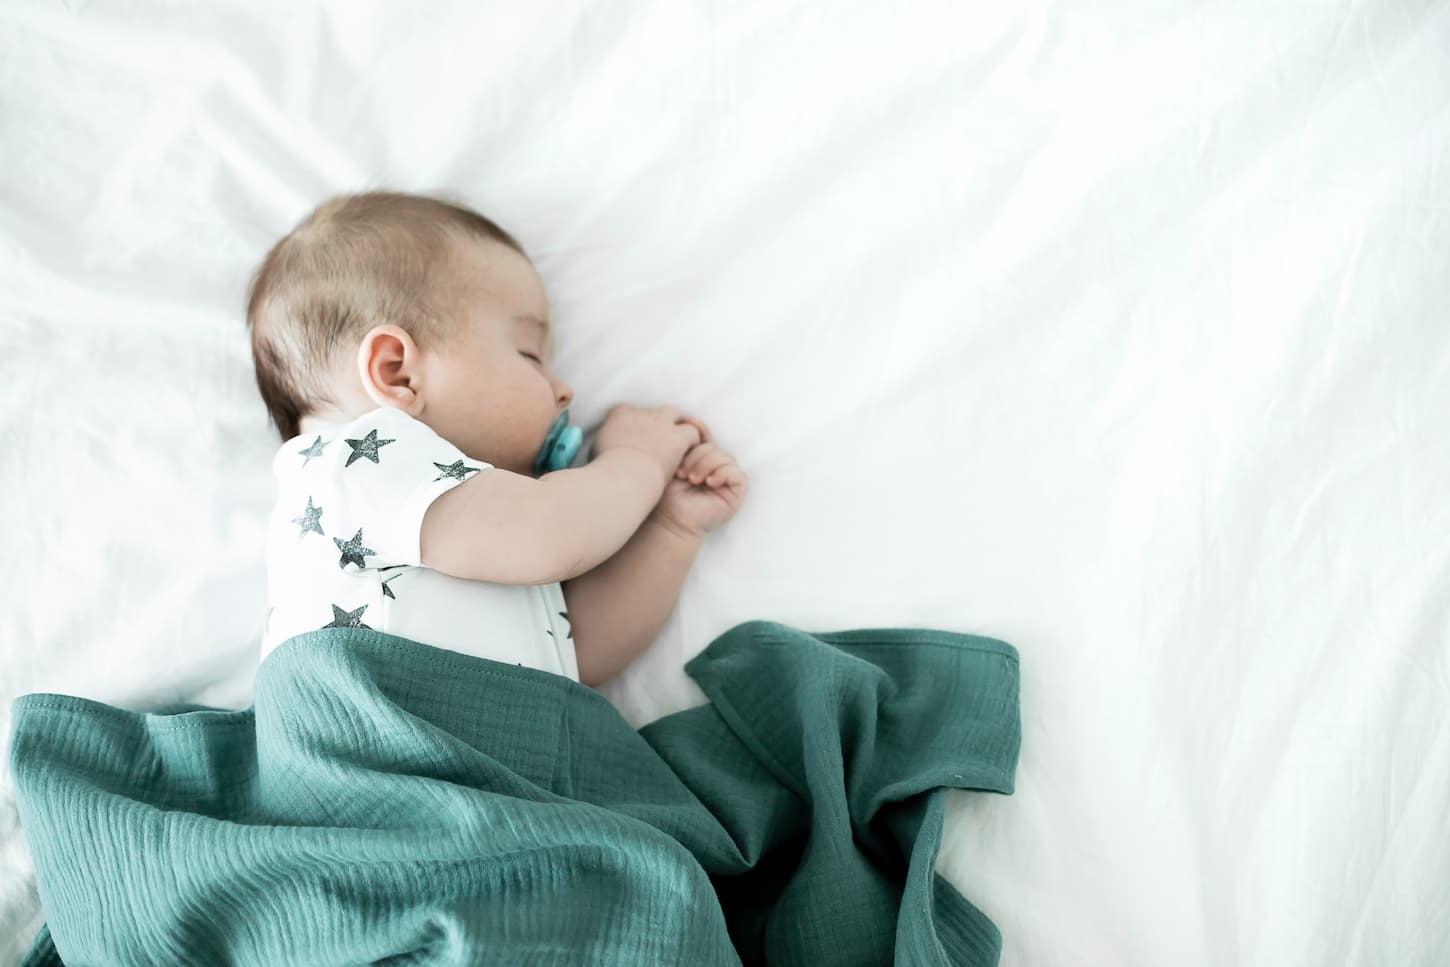 An image of a 3-month-old baby sleeping on the bed and covered with a muslin diaper. Top view.